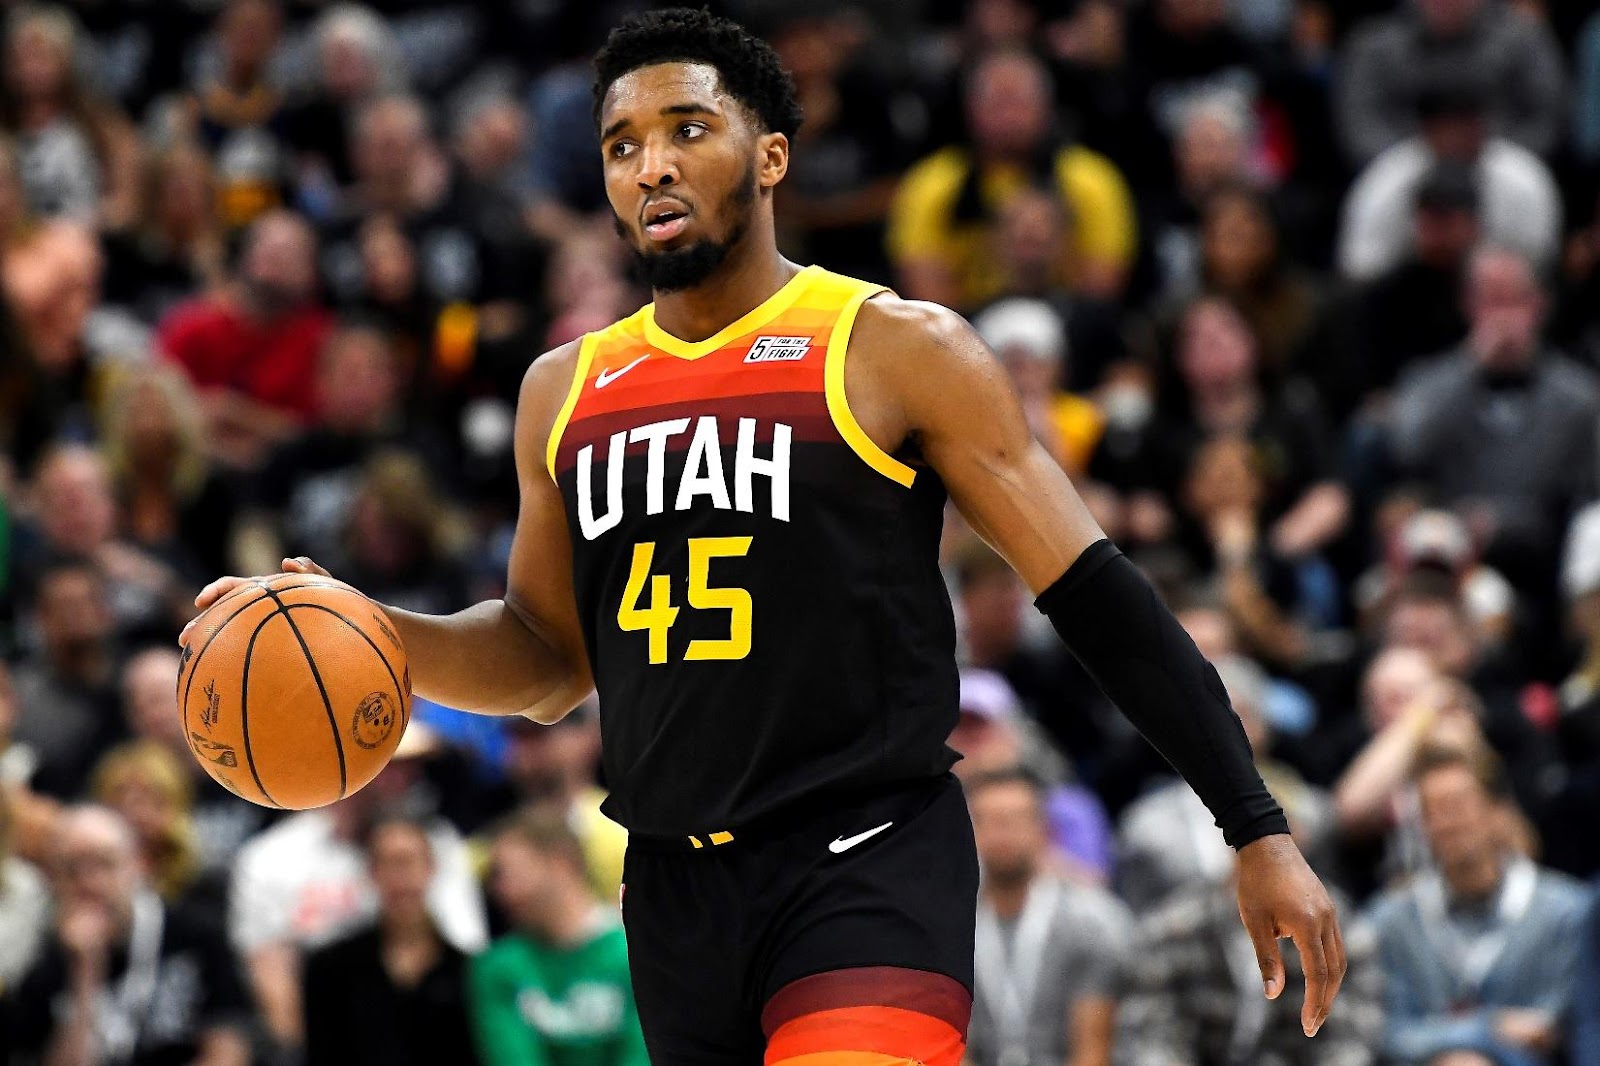 Knicks' Donovan Mitchell Watch begins after Jazz ouster